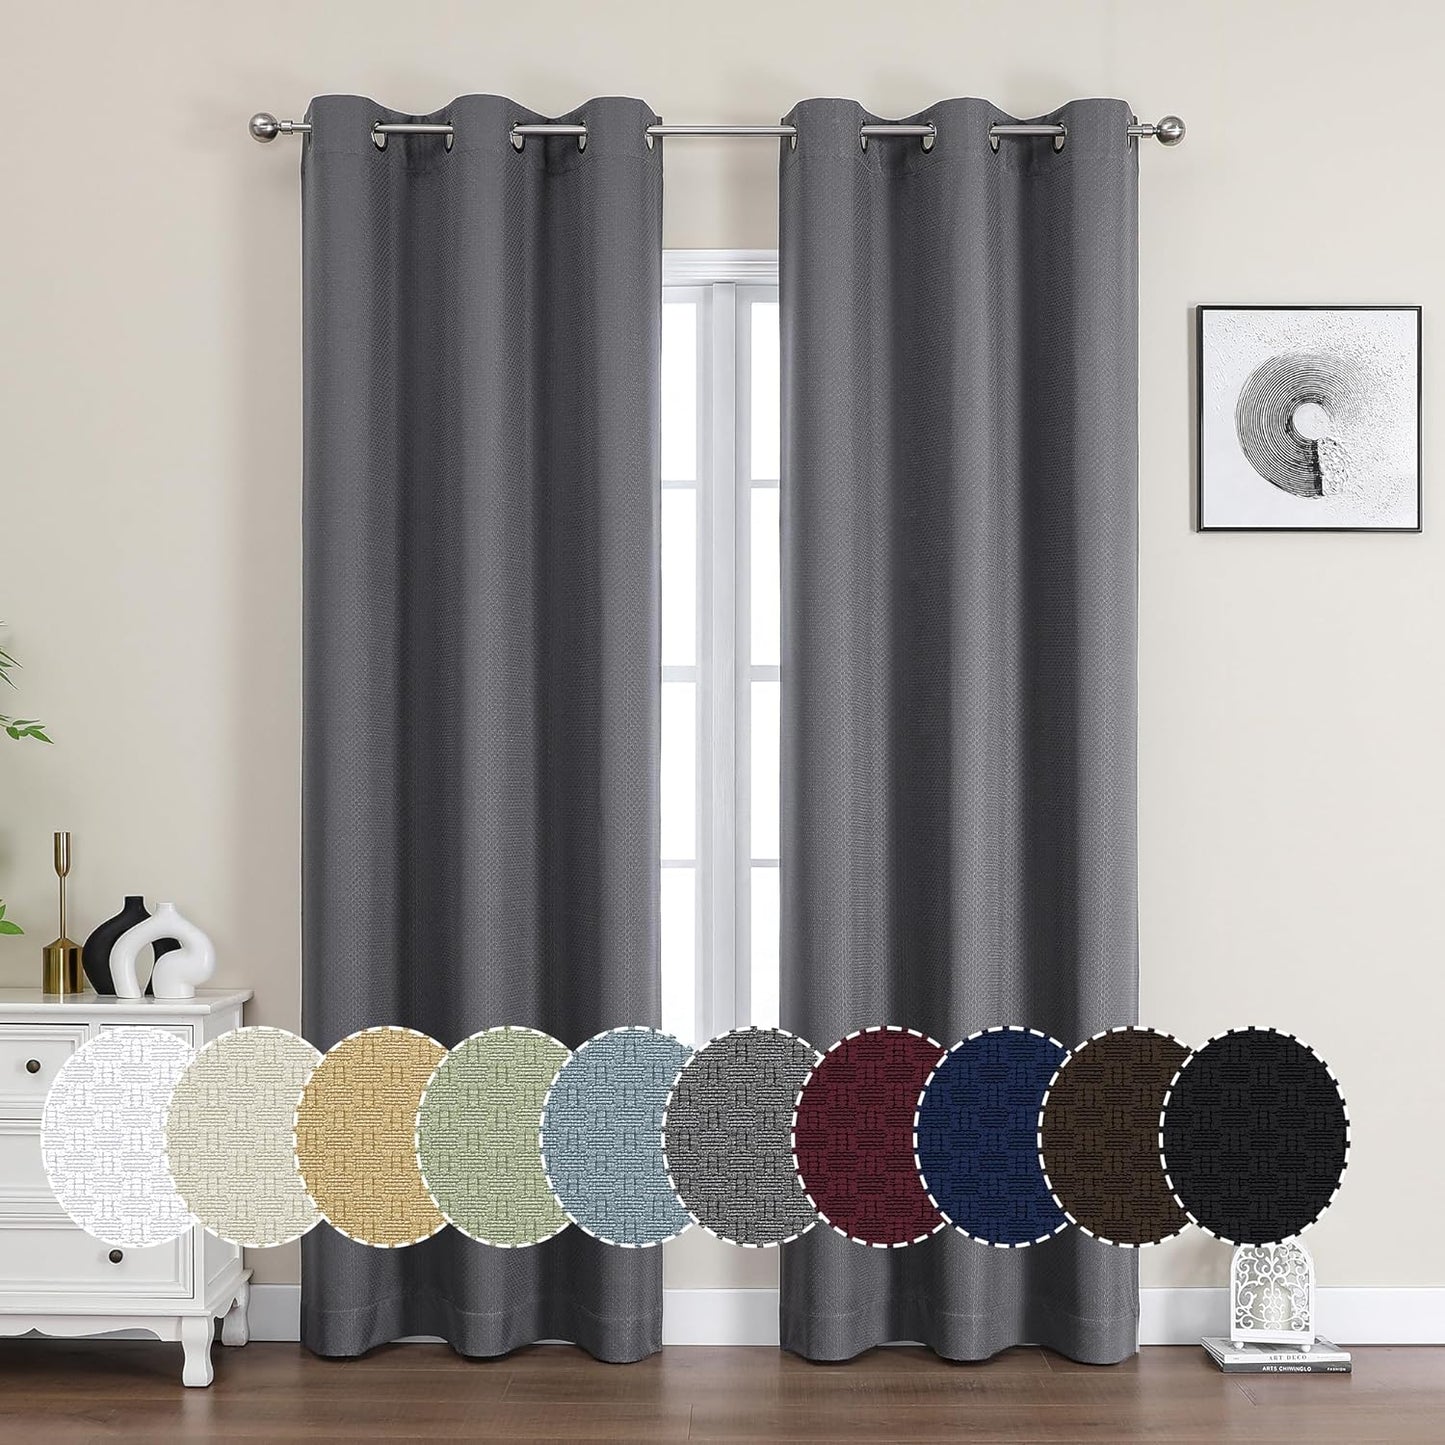 OVZME 100% Black Out Curtains 63 Inch Long 2 Panel Sets for Living Room, Completely Blackout Bedroom Drapes Textured Thermal Insulated Warm Fleece for Winter, Grommet Top, 42W X 63L, Sky Blue  OVZME Charcoal Grey 42W X 84L Inch X 2 Panels 